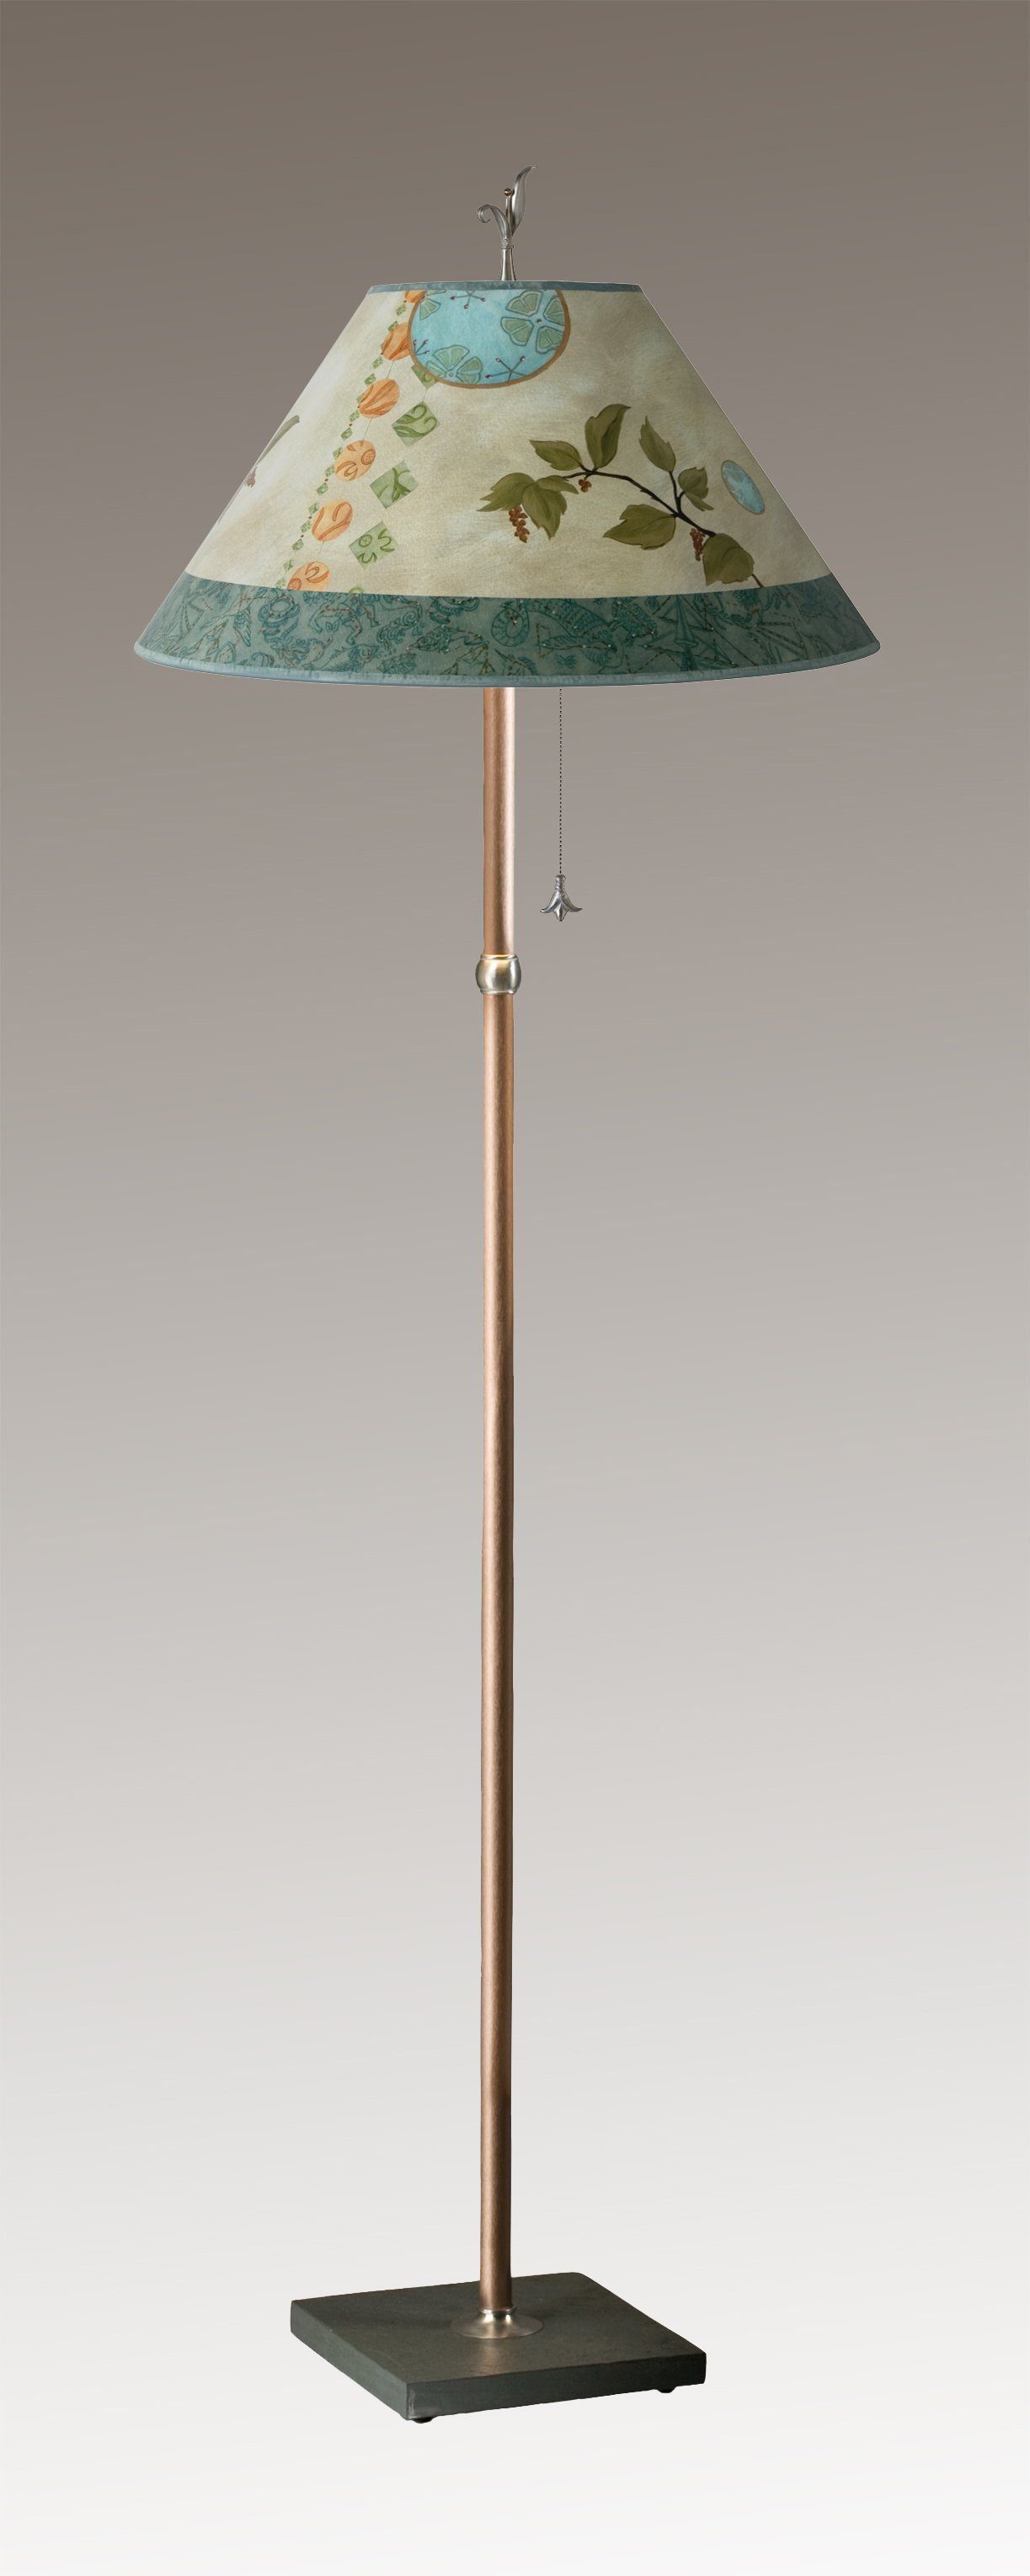 Janna Ugone & Co Floor Lamps Copper Floor Lamp with Large Conical Shade in Celestial Leaf